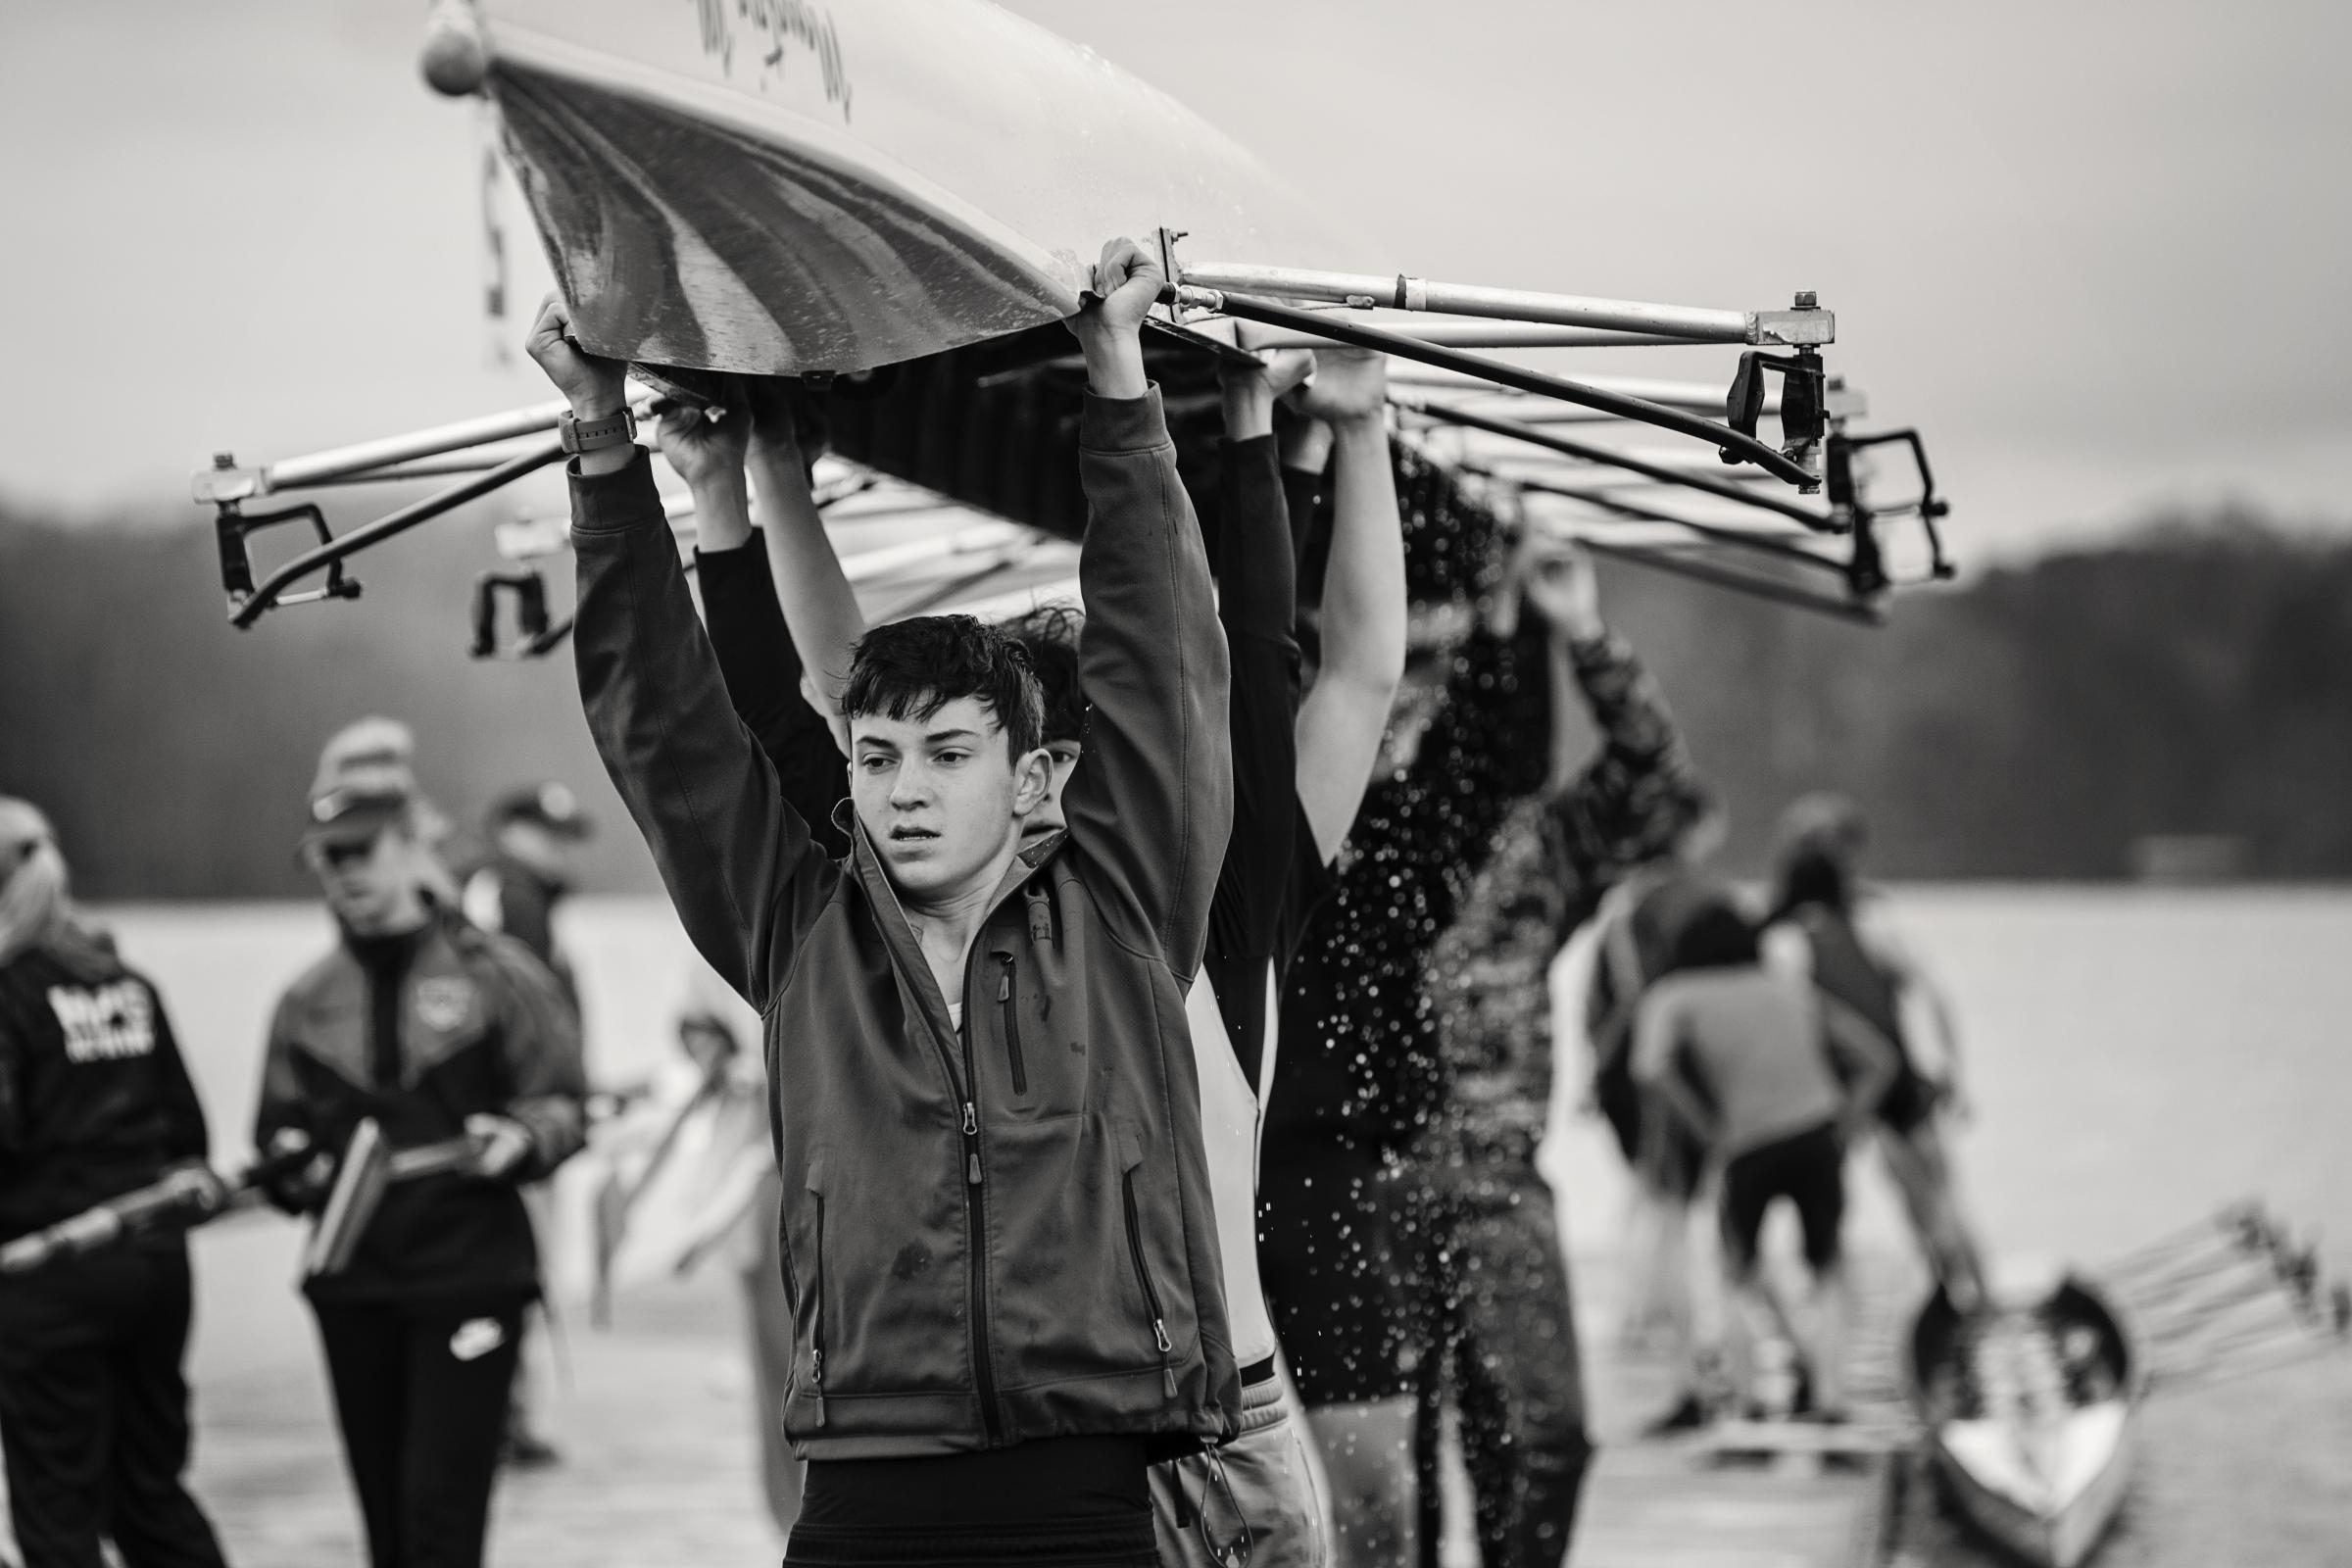 Growing Up - Asheville Youth Rowing crew members lift their boat after...